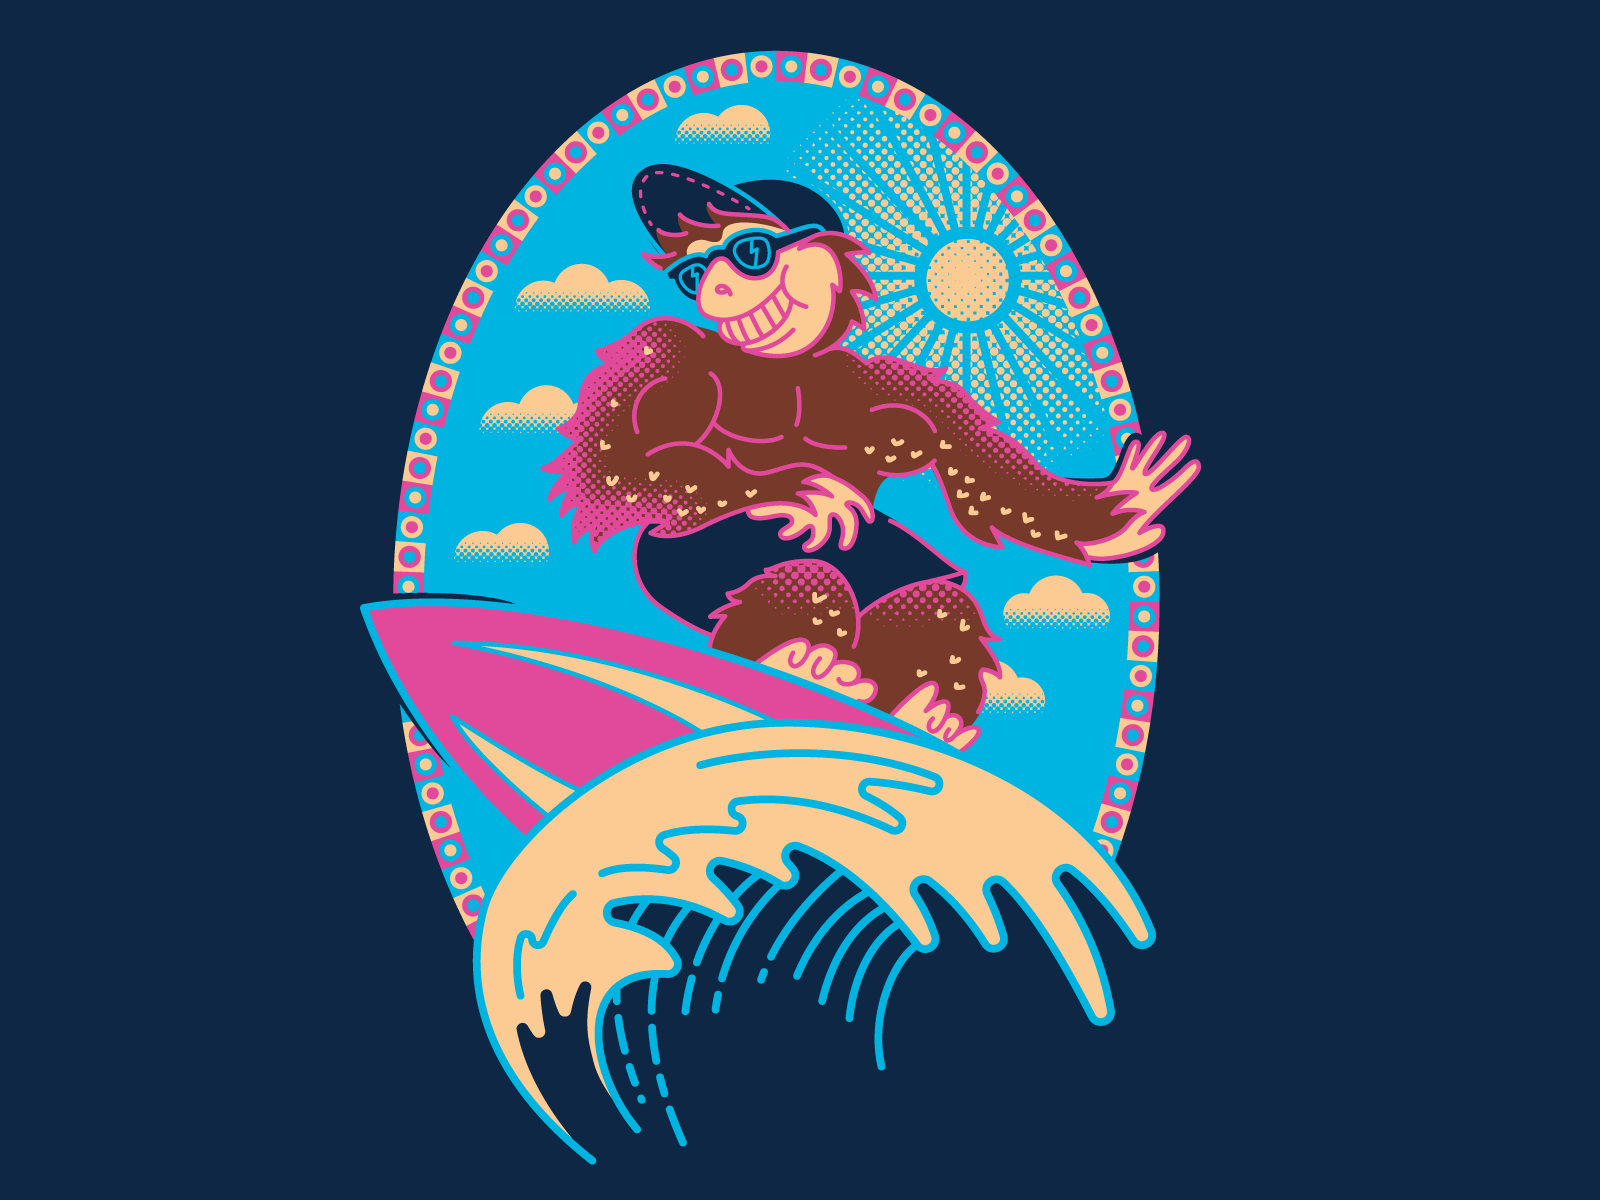 Surfs Up! by Kasey Loman on Dribbble